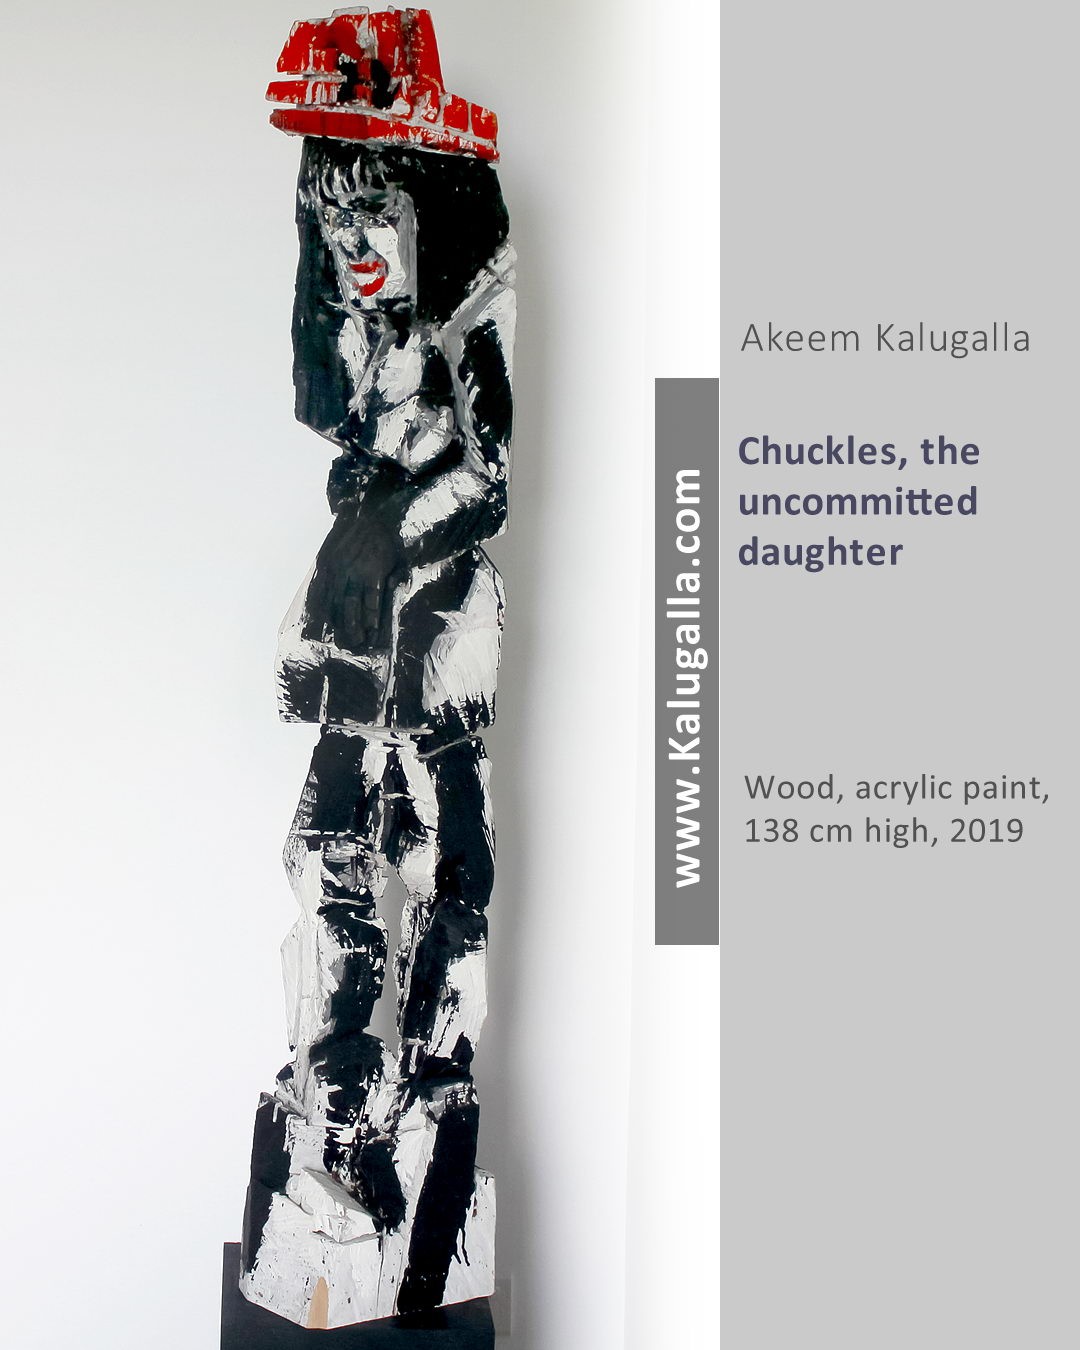 Chuckles,theUncommitted daughter by Akeem Kalugalla